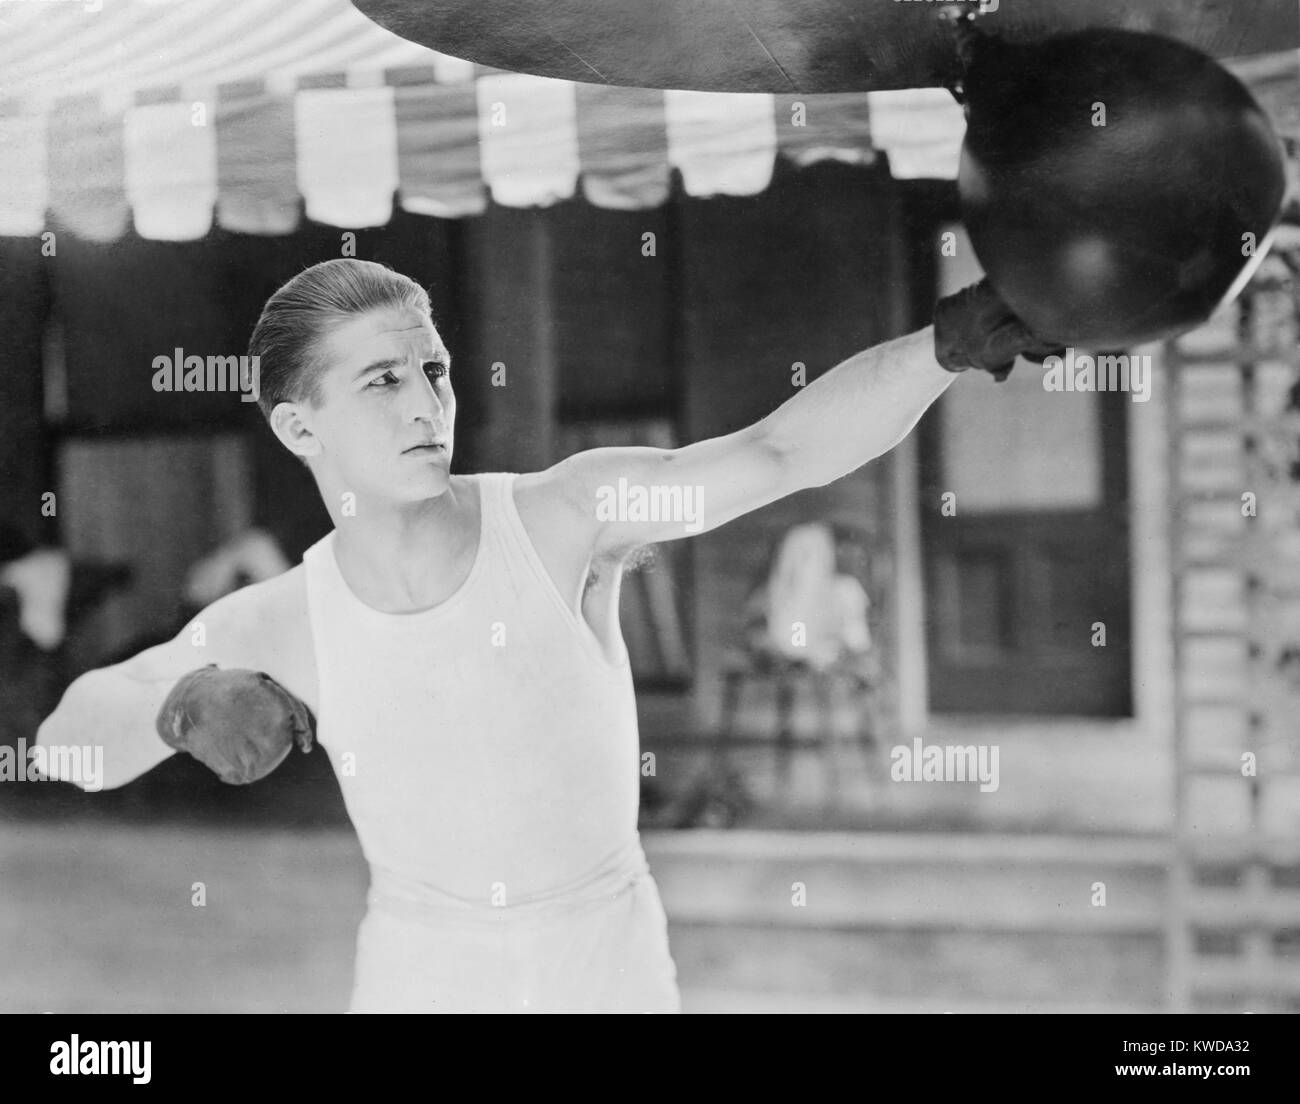 Georges Carpentier, French boxer, fought as a light heavyweight/ heavyweight from 1908 to 1926. After his boxing career, he acted in silent and talking films. Ca. 1920. (BSLOC 2015 17 56) Stock Photo